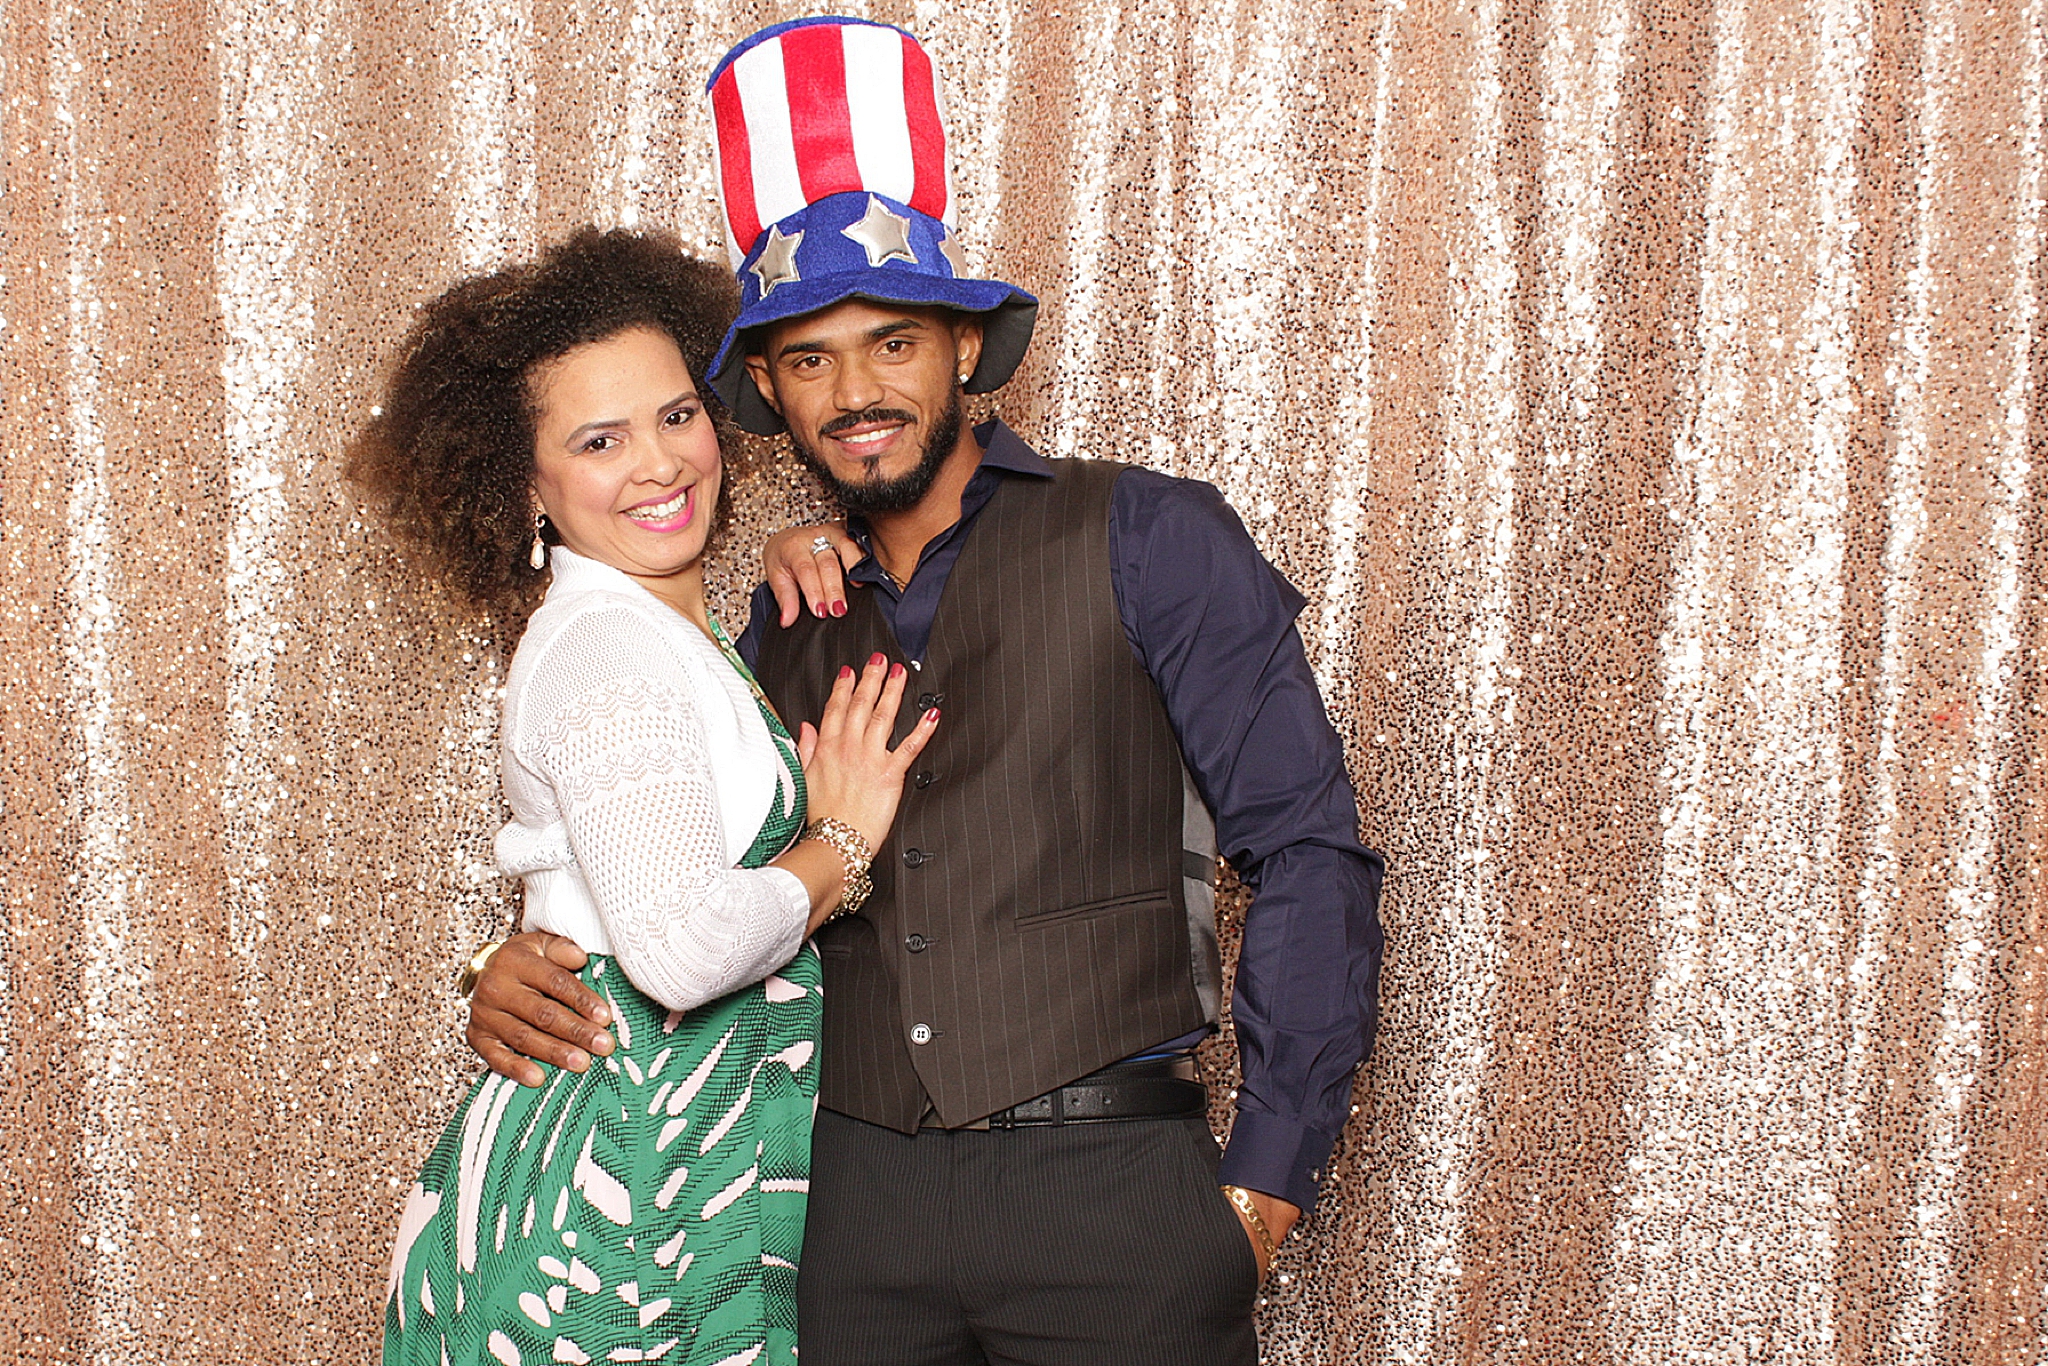 fun poses in photo booth at New Jersey wedding